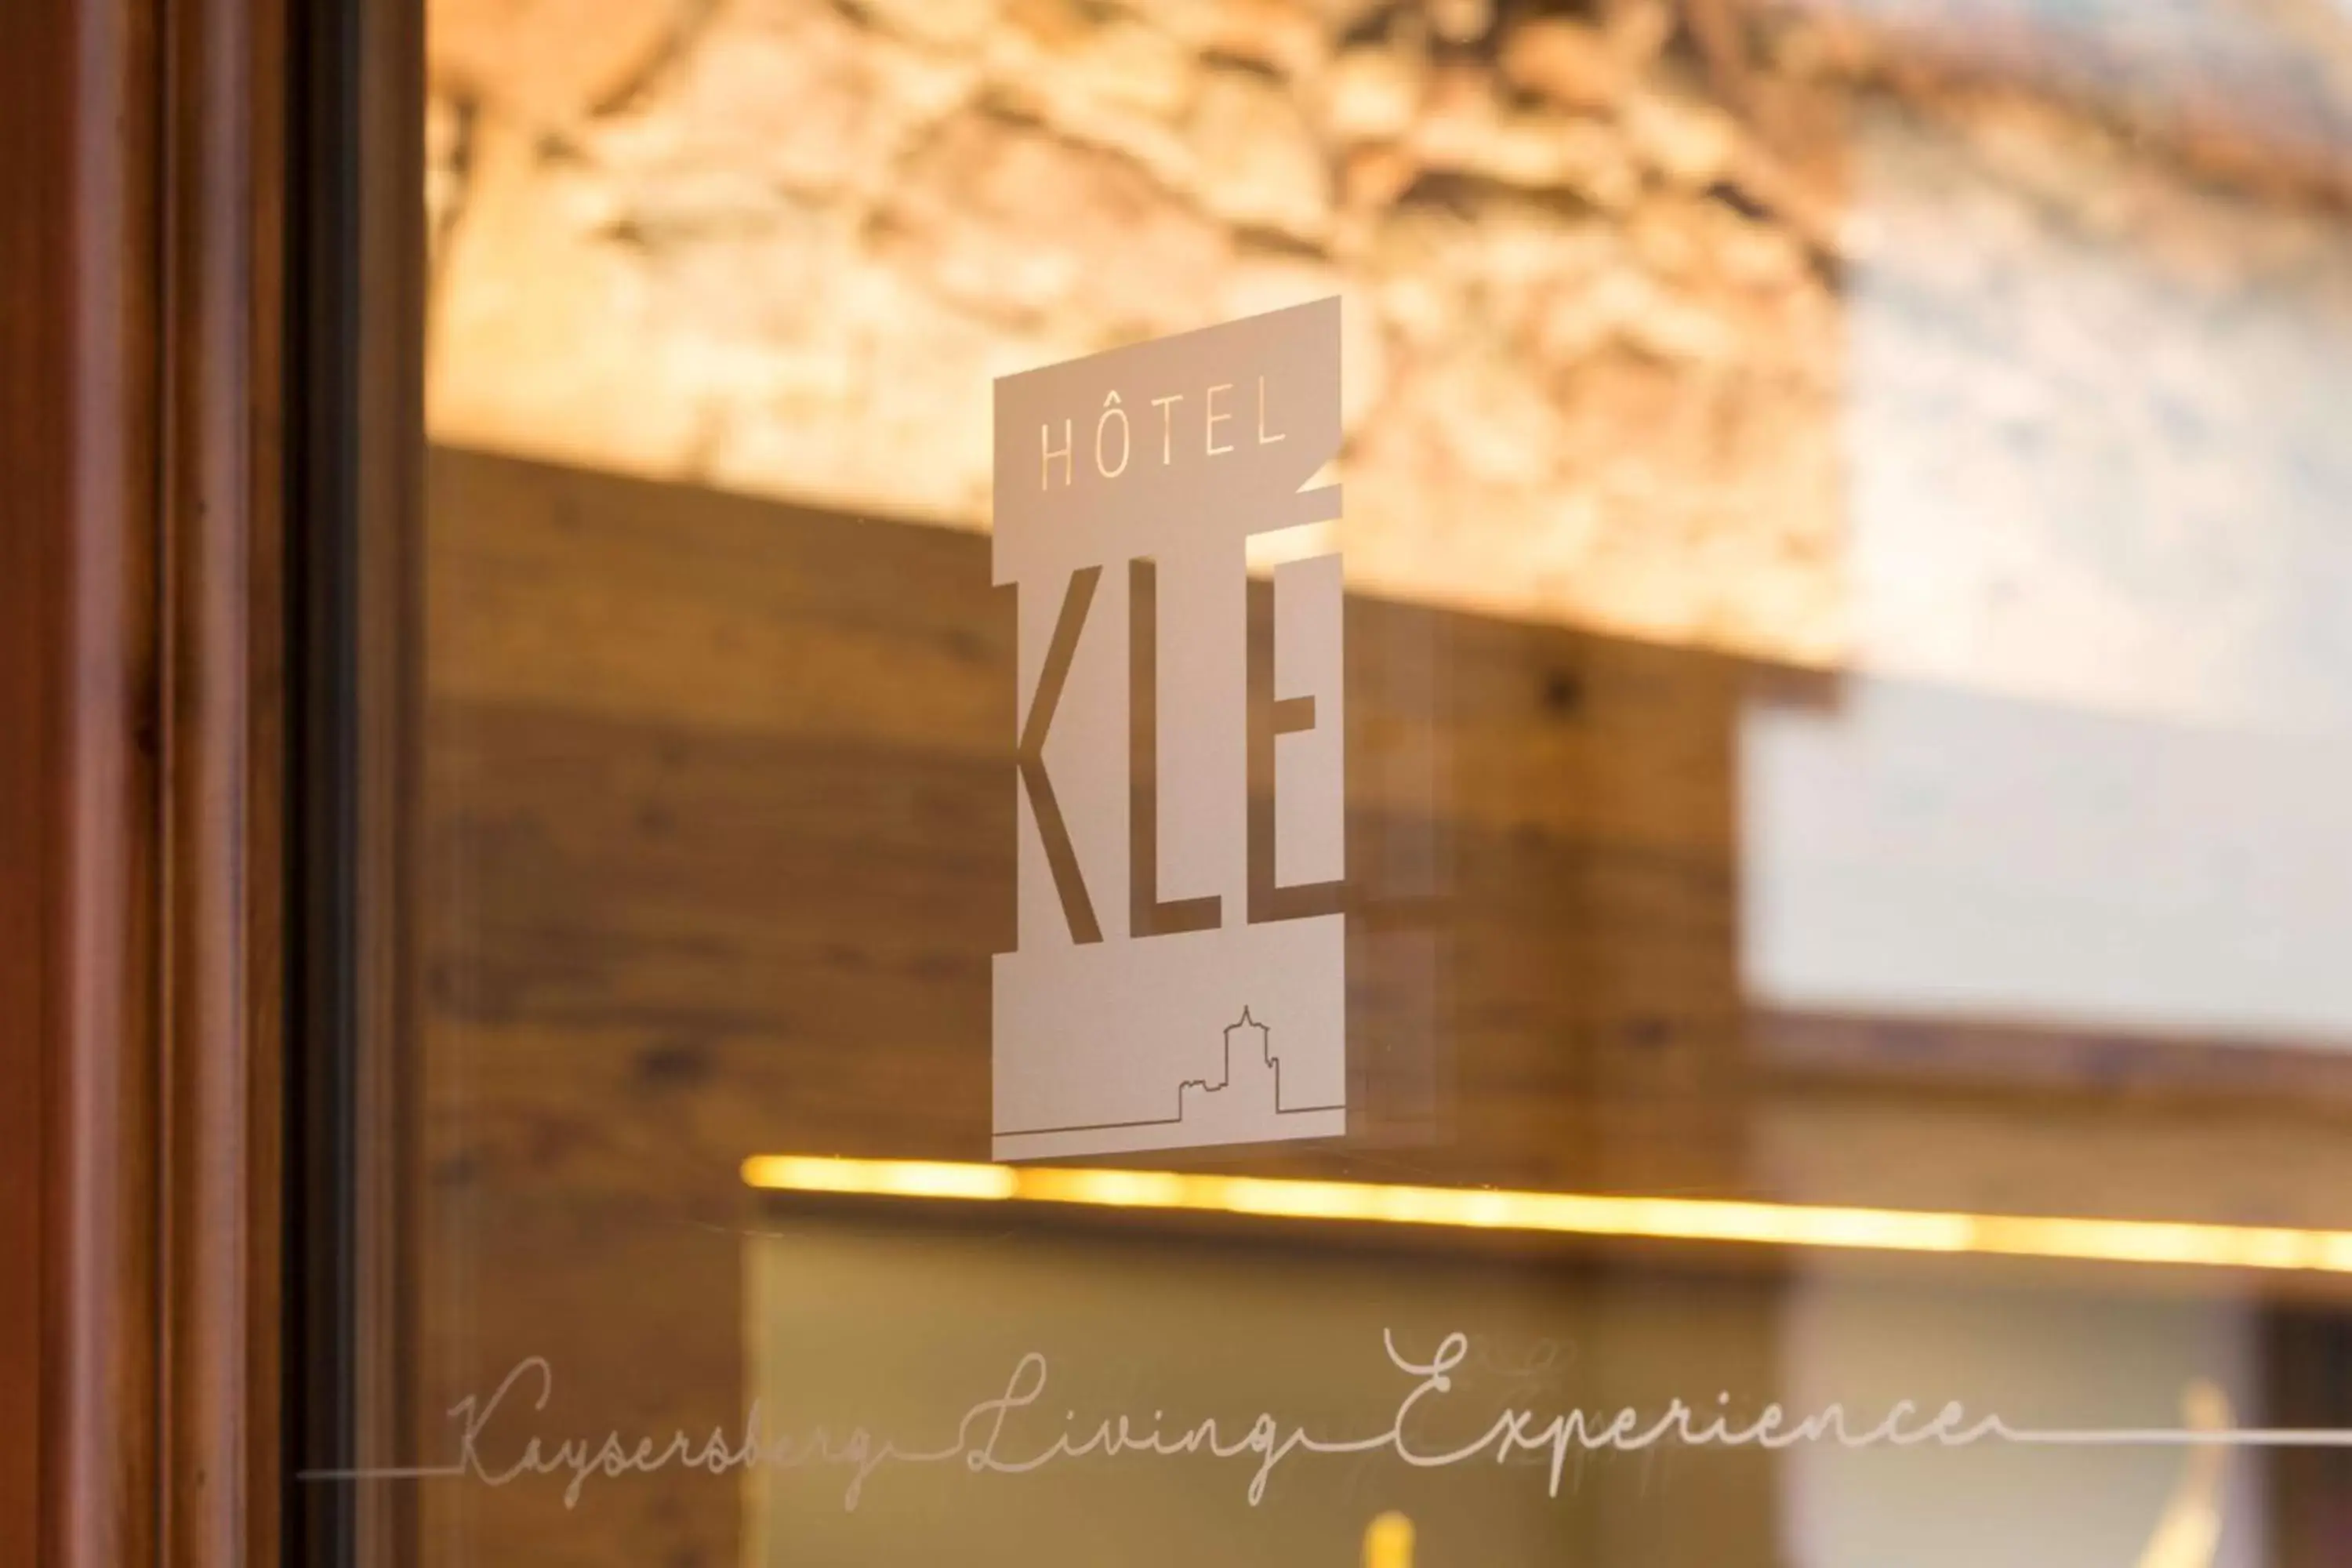 Lobby or reception in Hotel KLE, BW Signature Collection